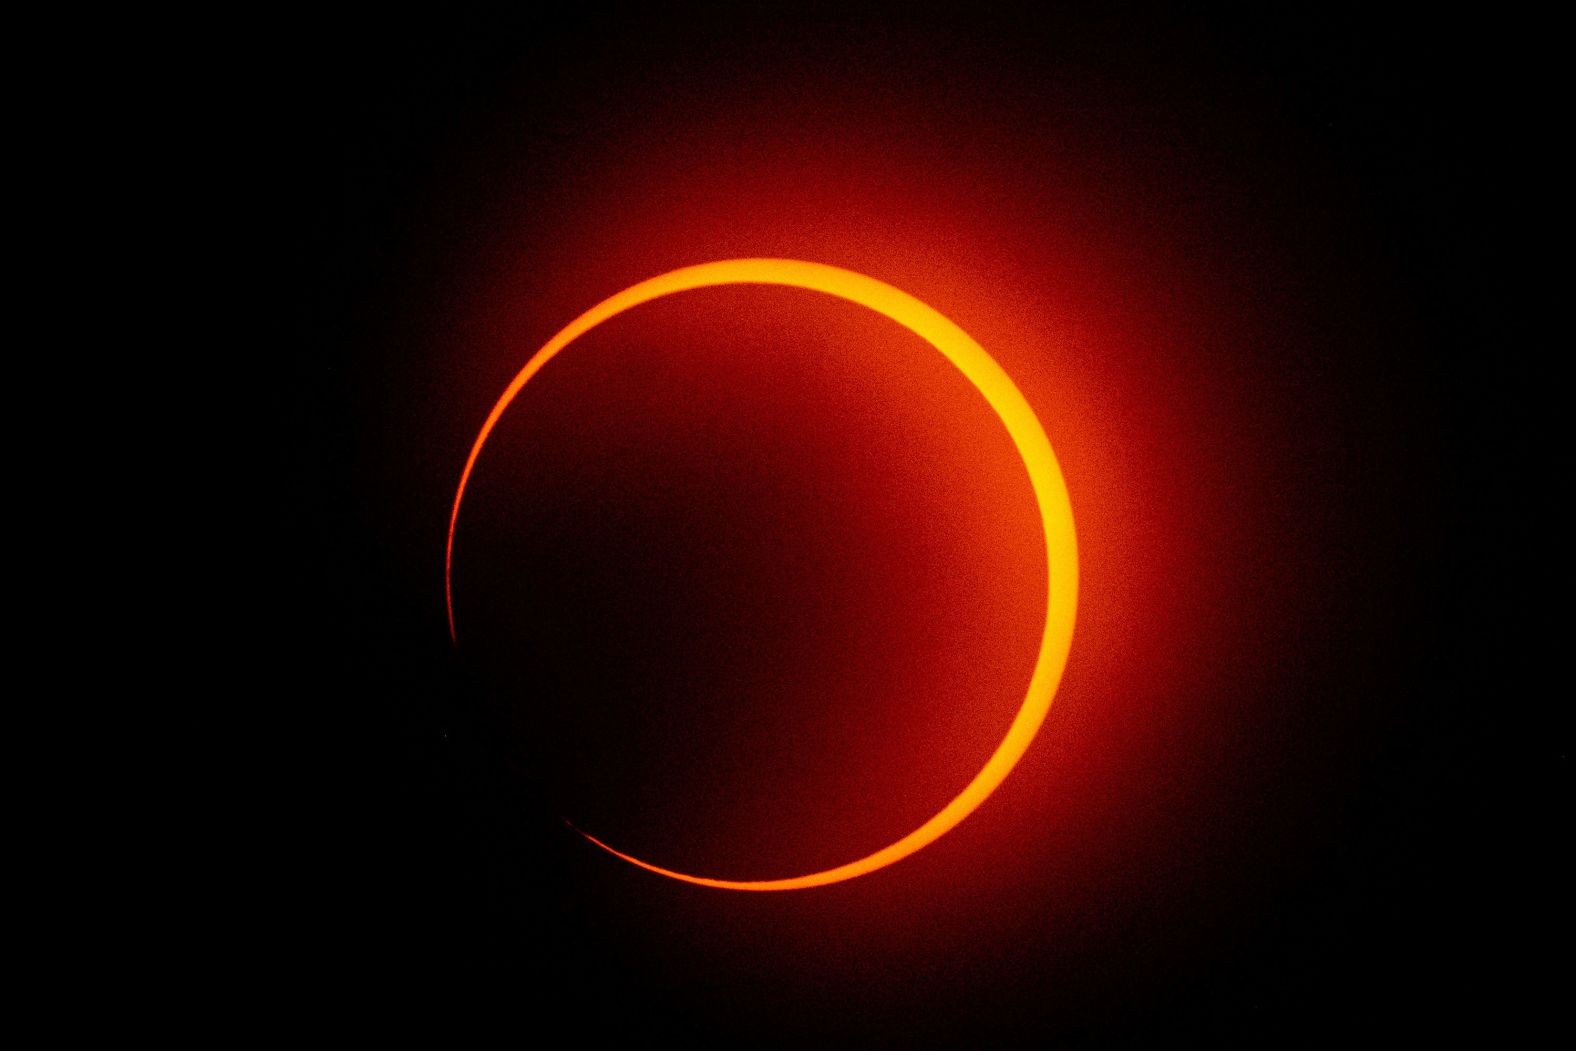 The eclipse is seen from Penonome, Panama.